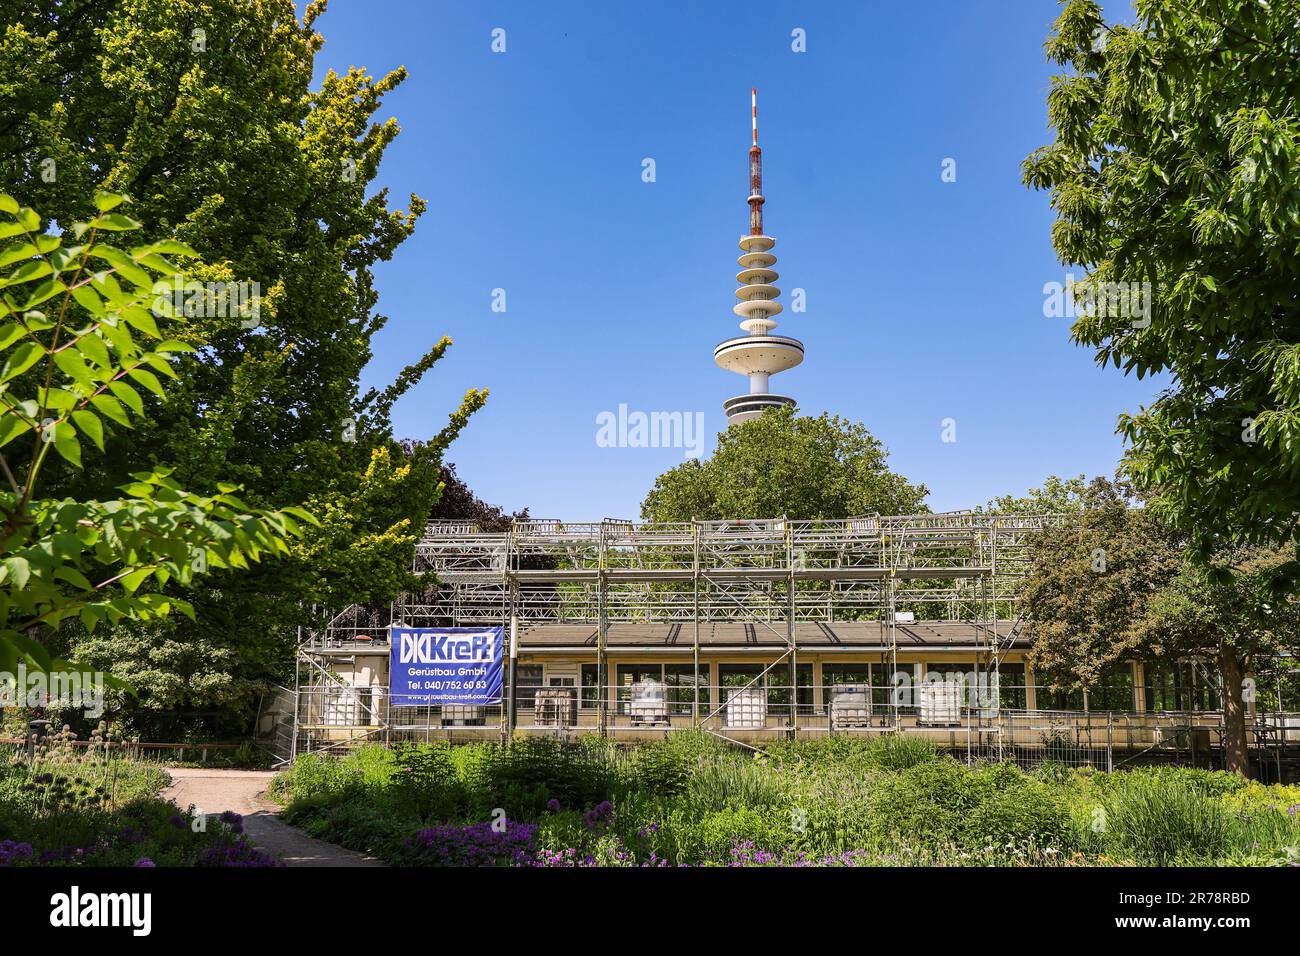 Hamburg, Germany. 12th June, 2023. View of the Café Seeterrassen in the Planten un Blomen park in Hamburg. The traditional pub with four event rooms and a 2,000 m² terrace as well as gastronomy has been empty since 2020. The planned demolition of the café, built in 1953 according to plans by Hamburg architect Ferdinand Streb for the International Garden Exhibition, was prevented by a petition. Now the district of Hamburg-Mitte has bought the Café Seeterrassen. Credit: Ulrich Perrey/dpa/Alamy Live News Stock Photo